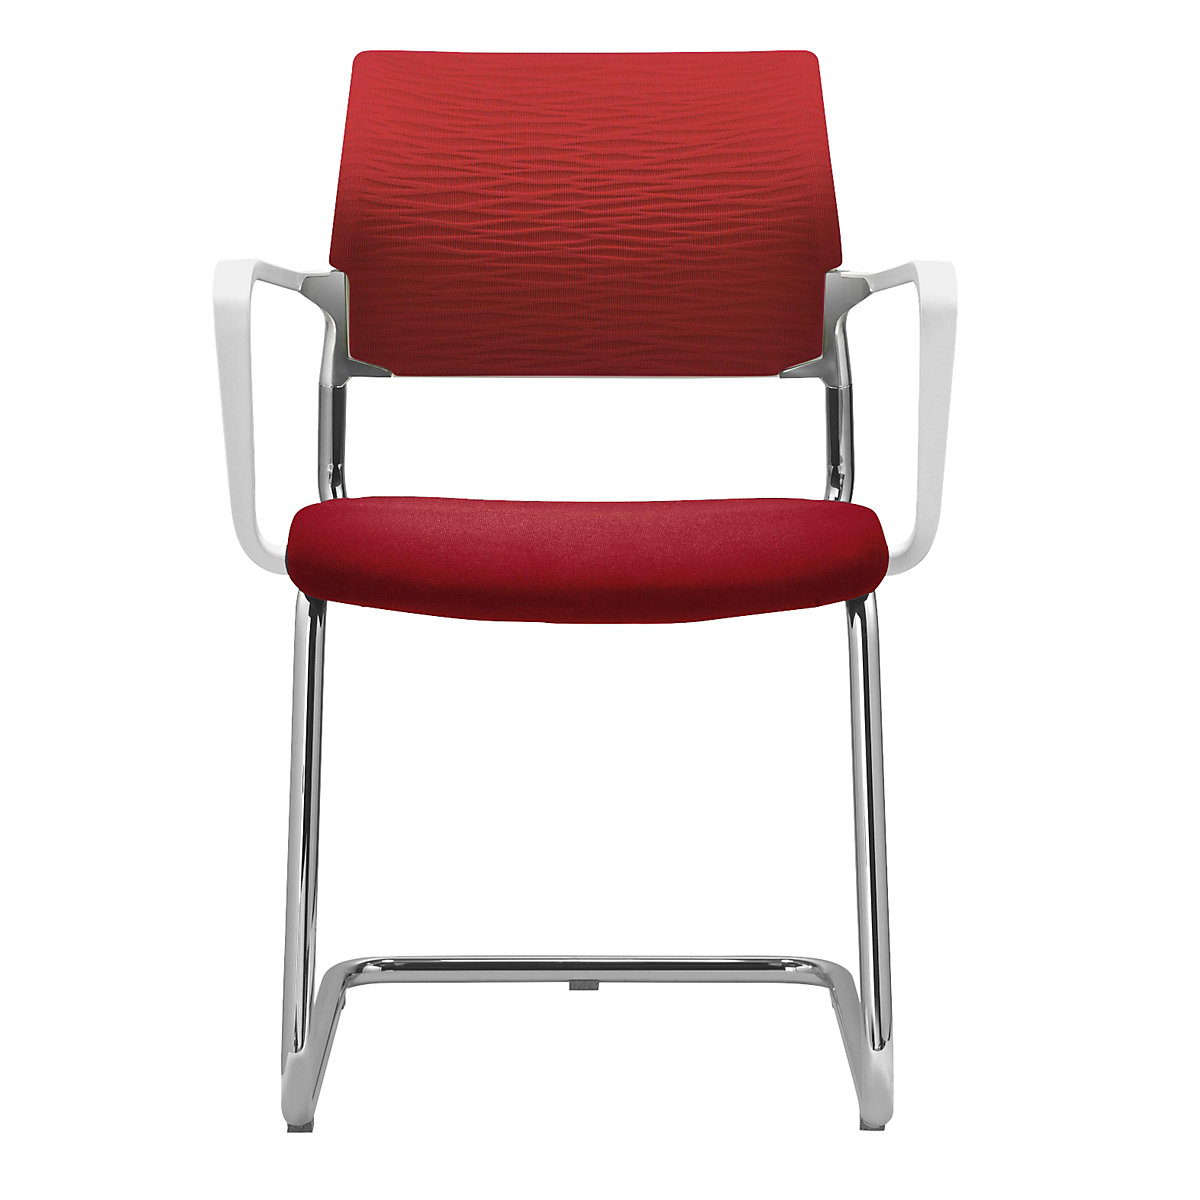 X-CODE visitors' chair – Dauphin